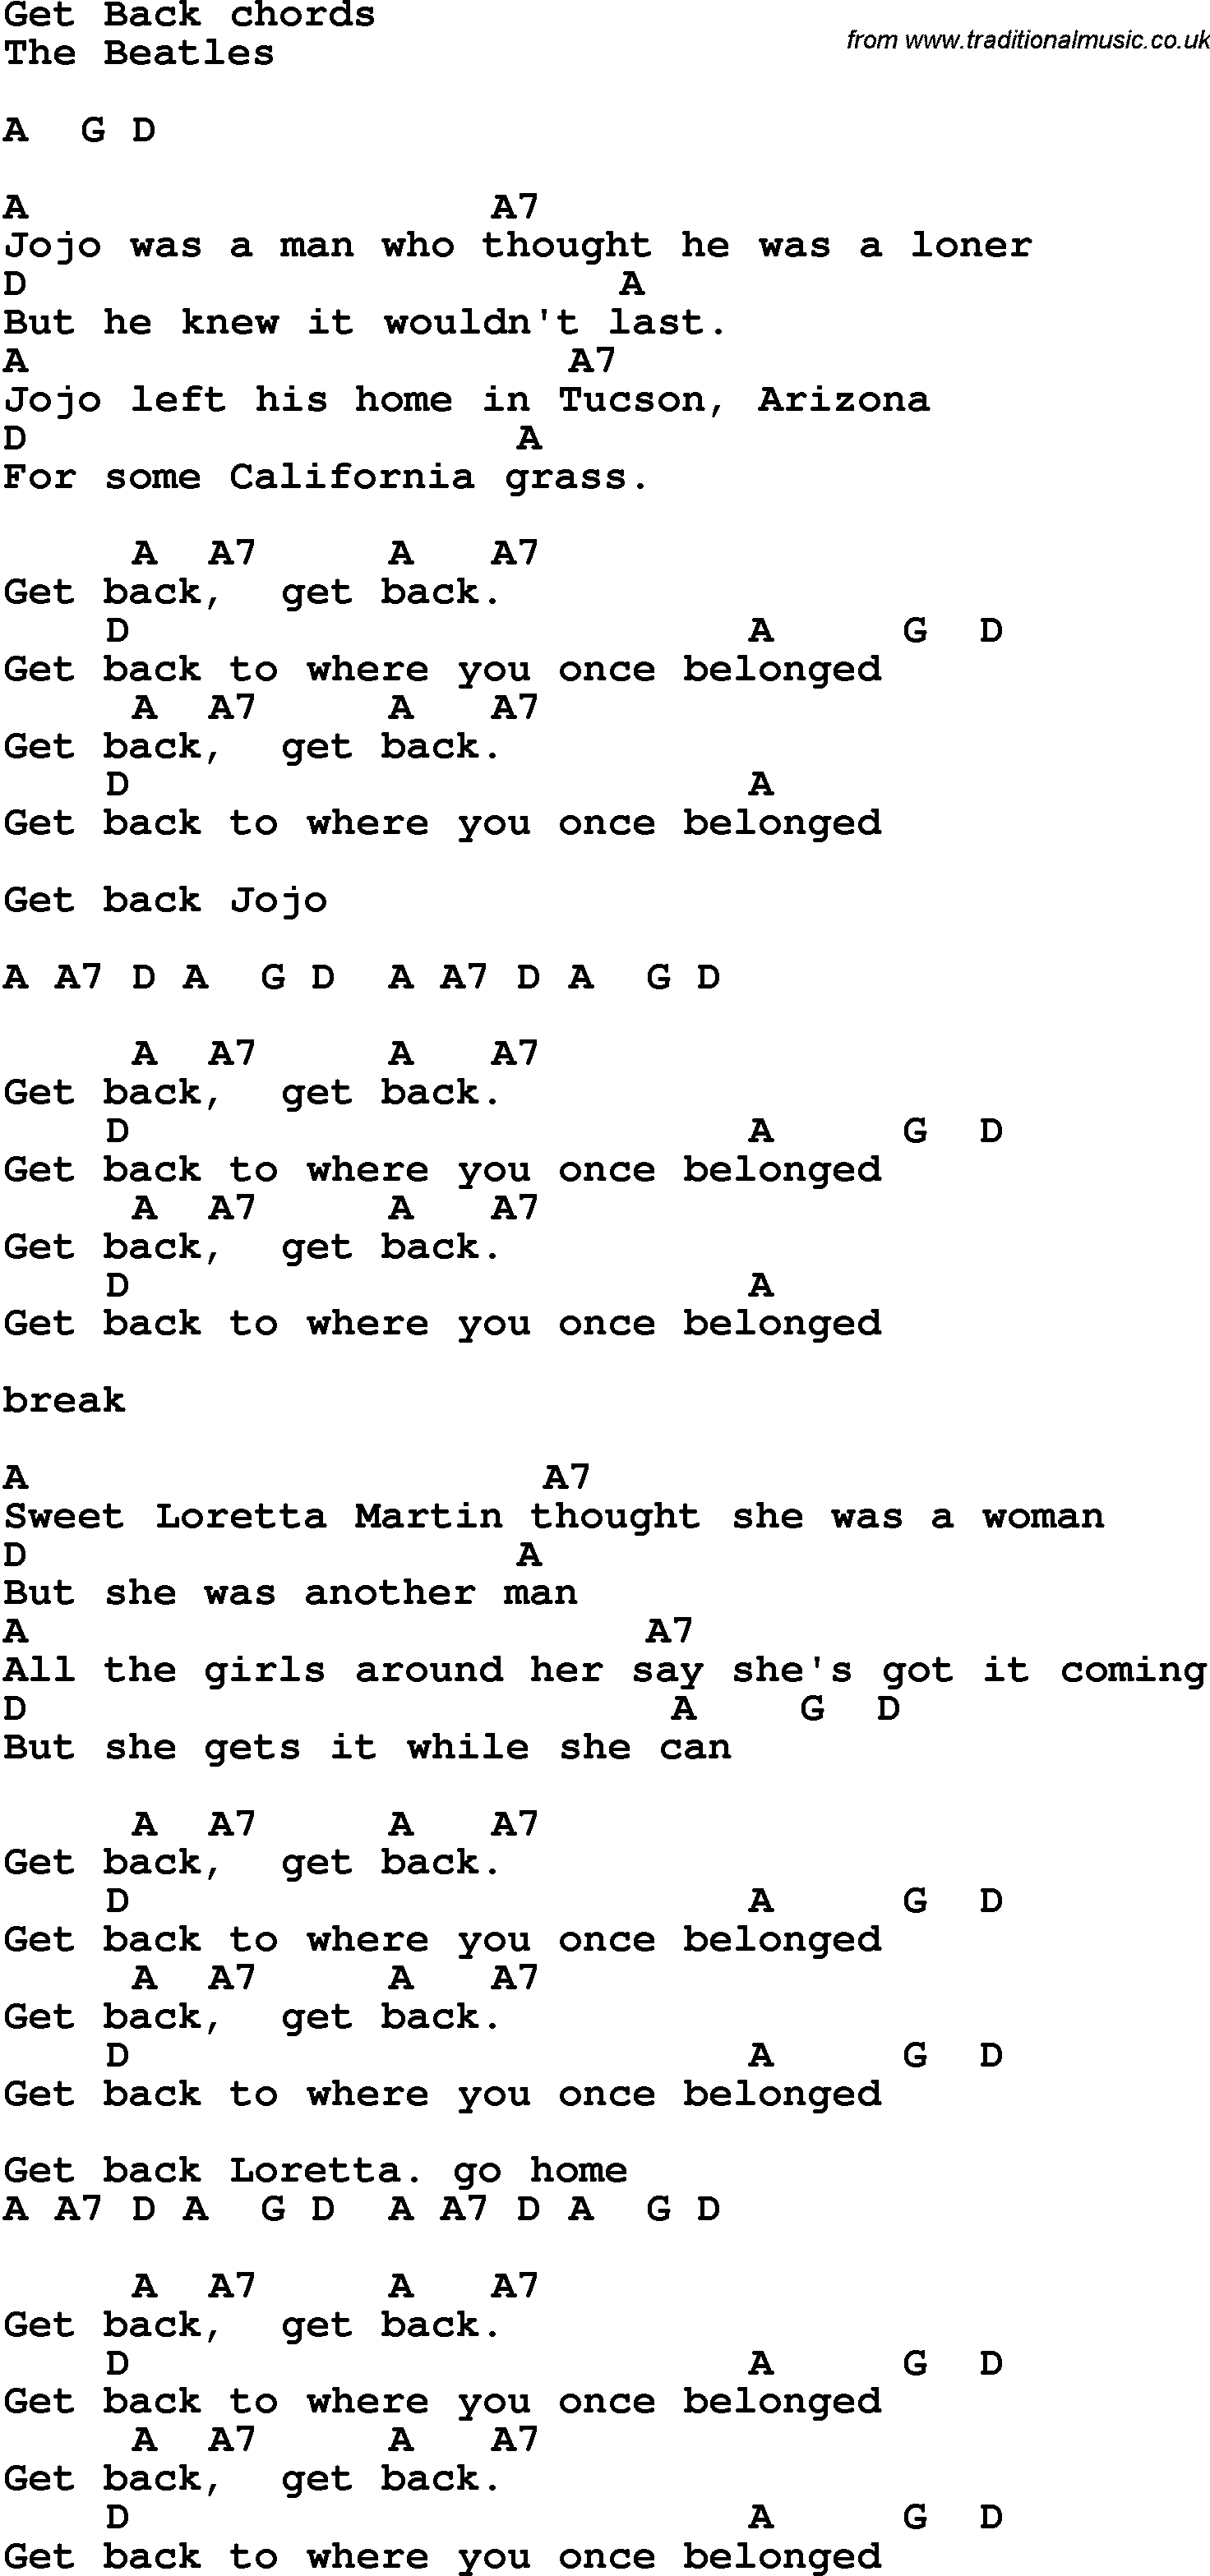 Song Lyrics with guitar chords for Get Back - The Beatles